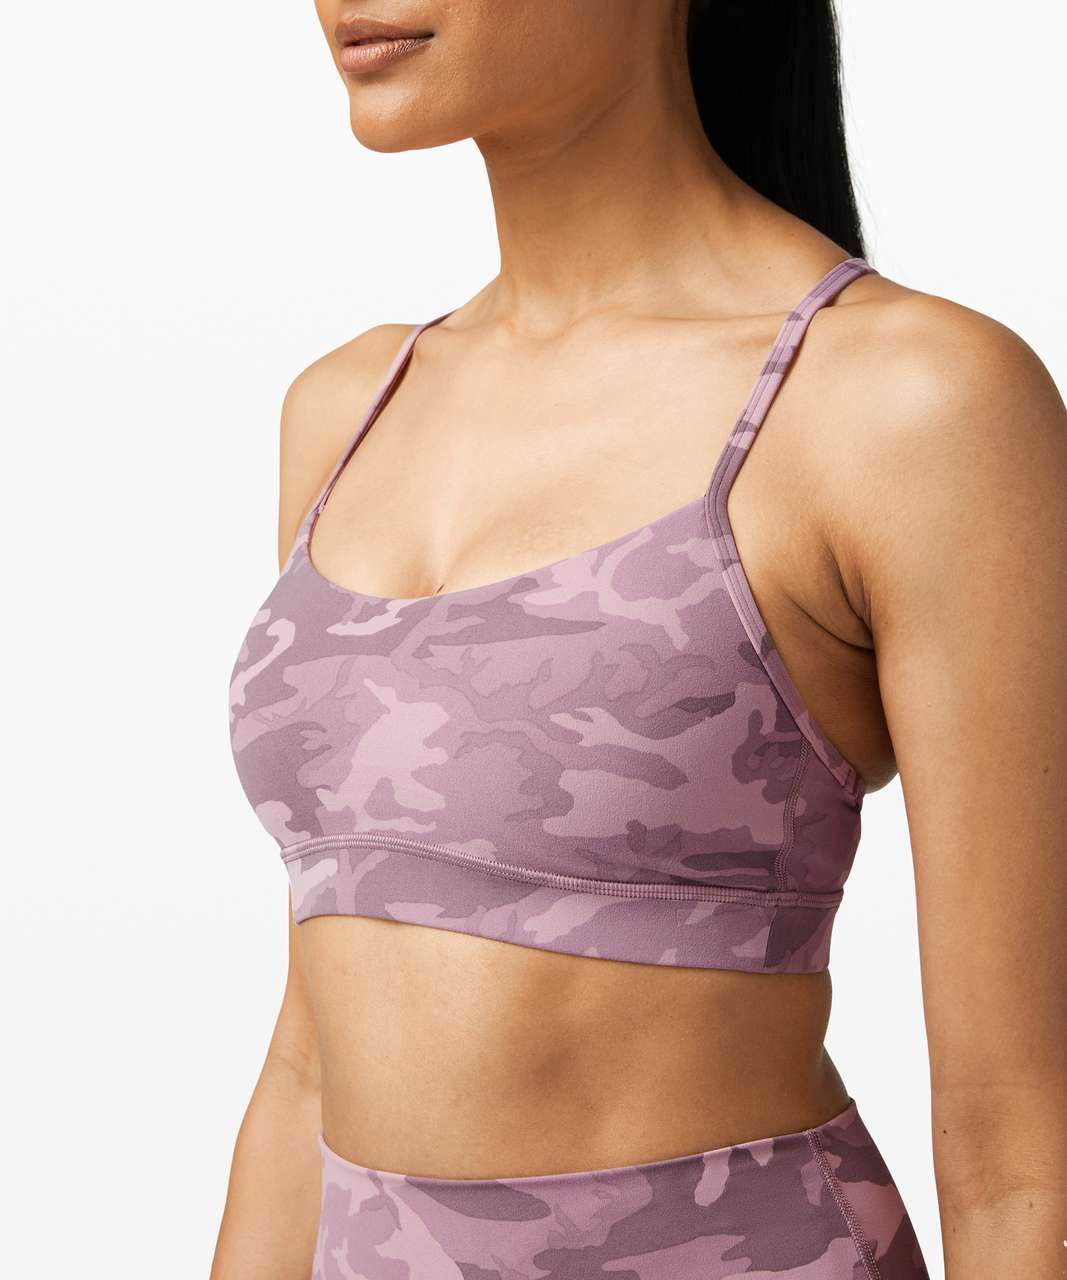 Lululemon Flow Y Bra Nulu *Light Support, B/C Cup - Incognito Camo Pink Taupe Multi